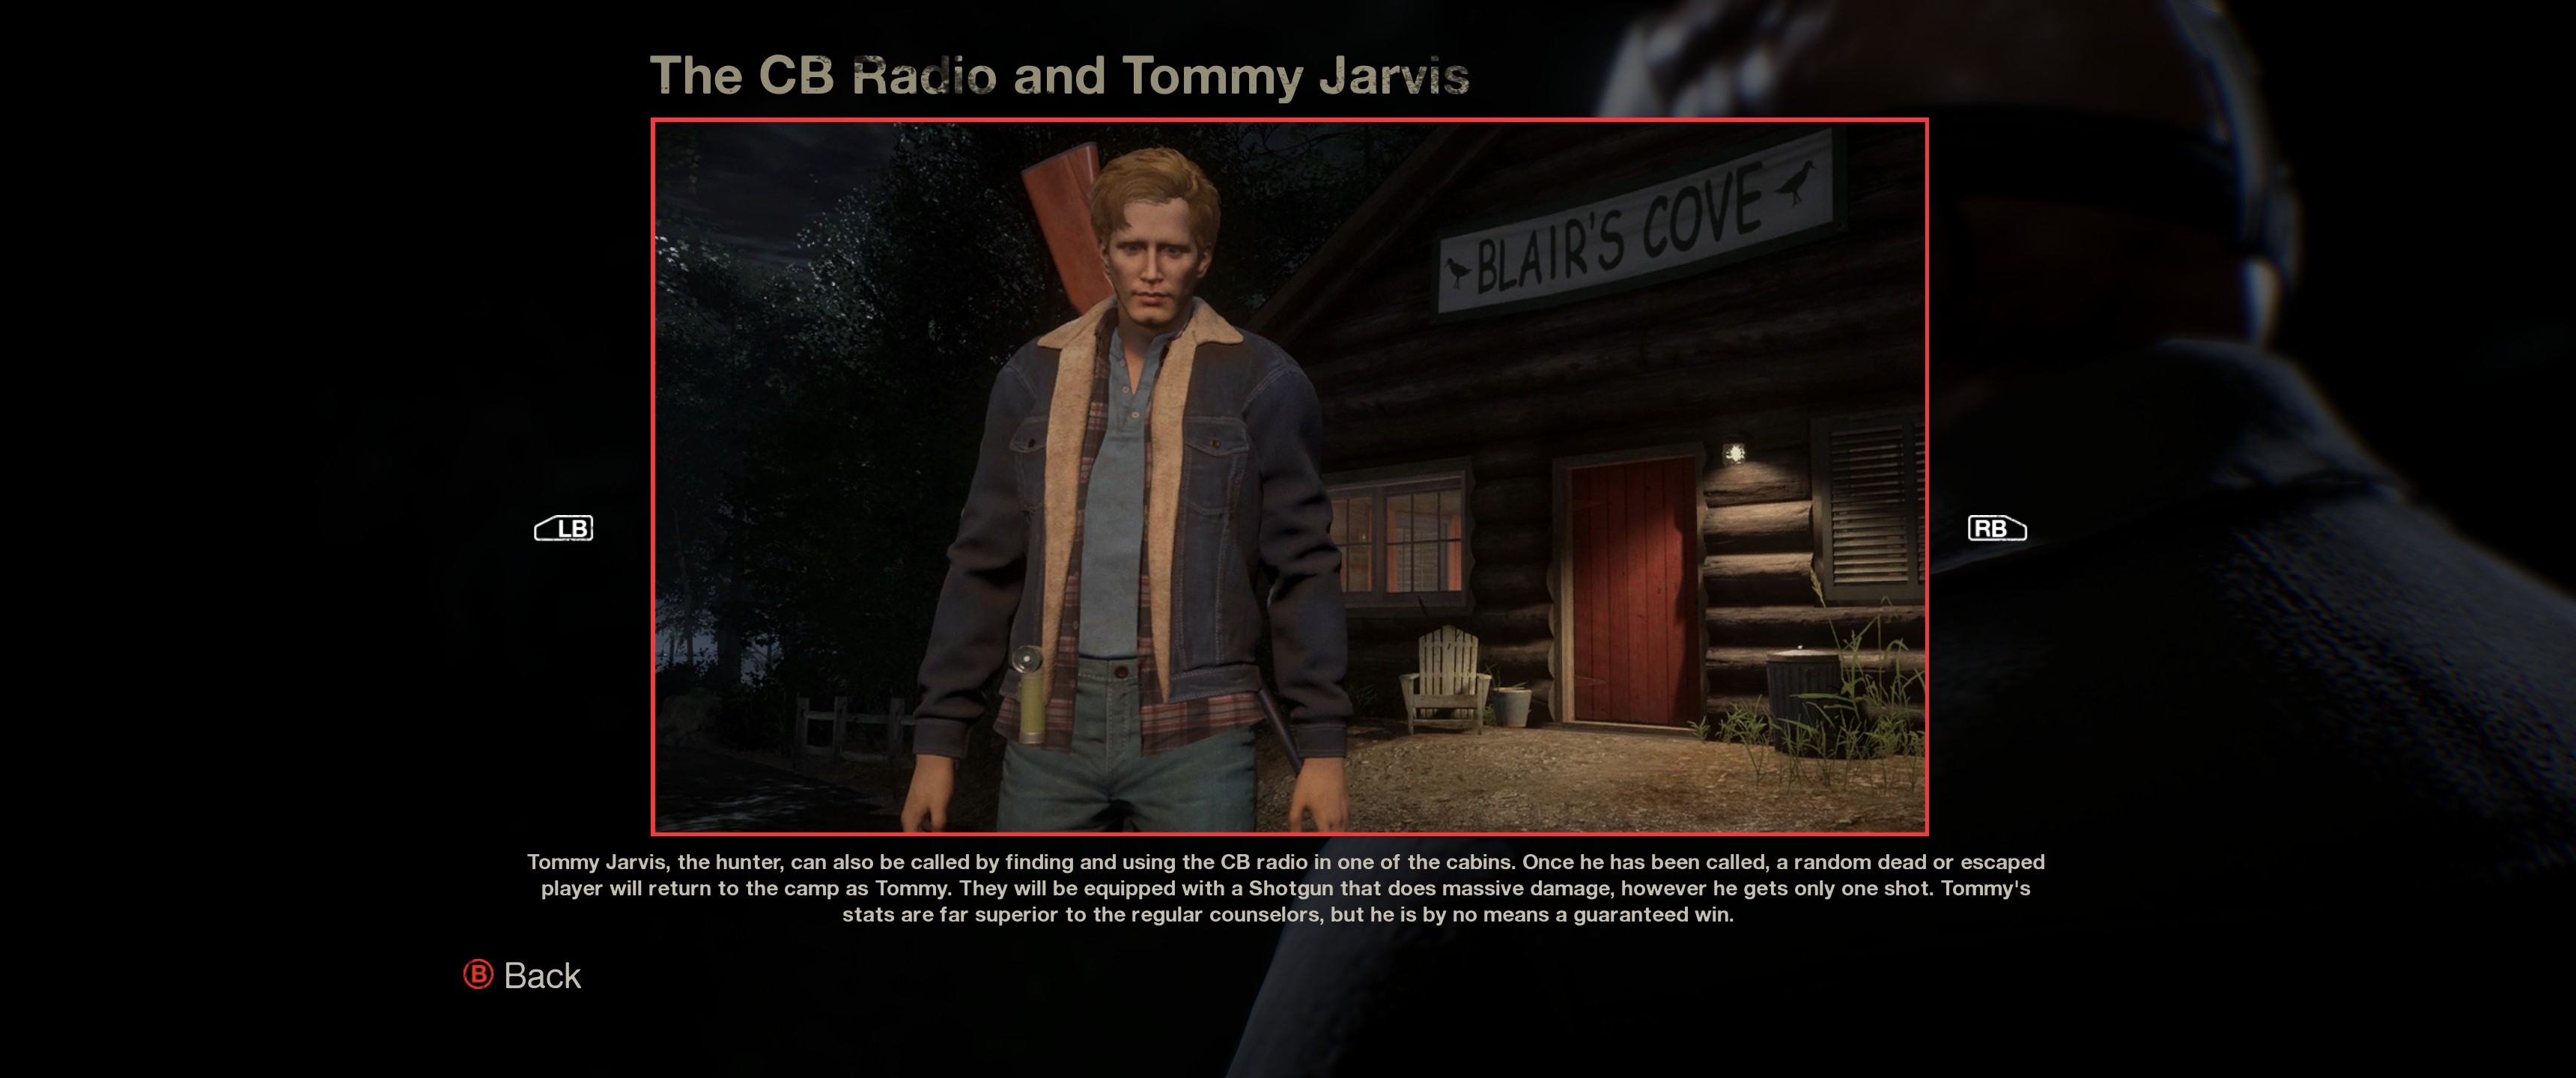 The CB Radio and Tommy Jarvis